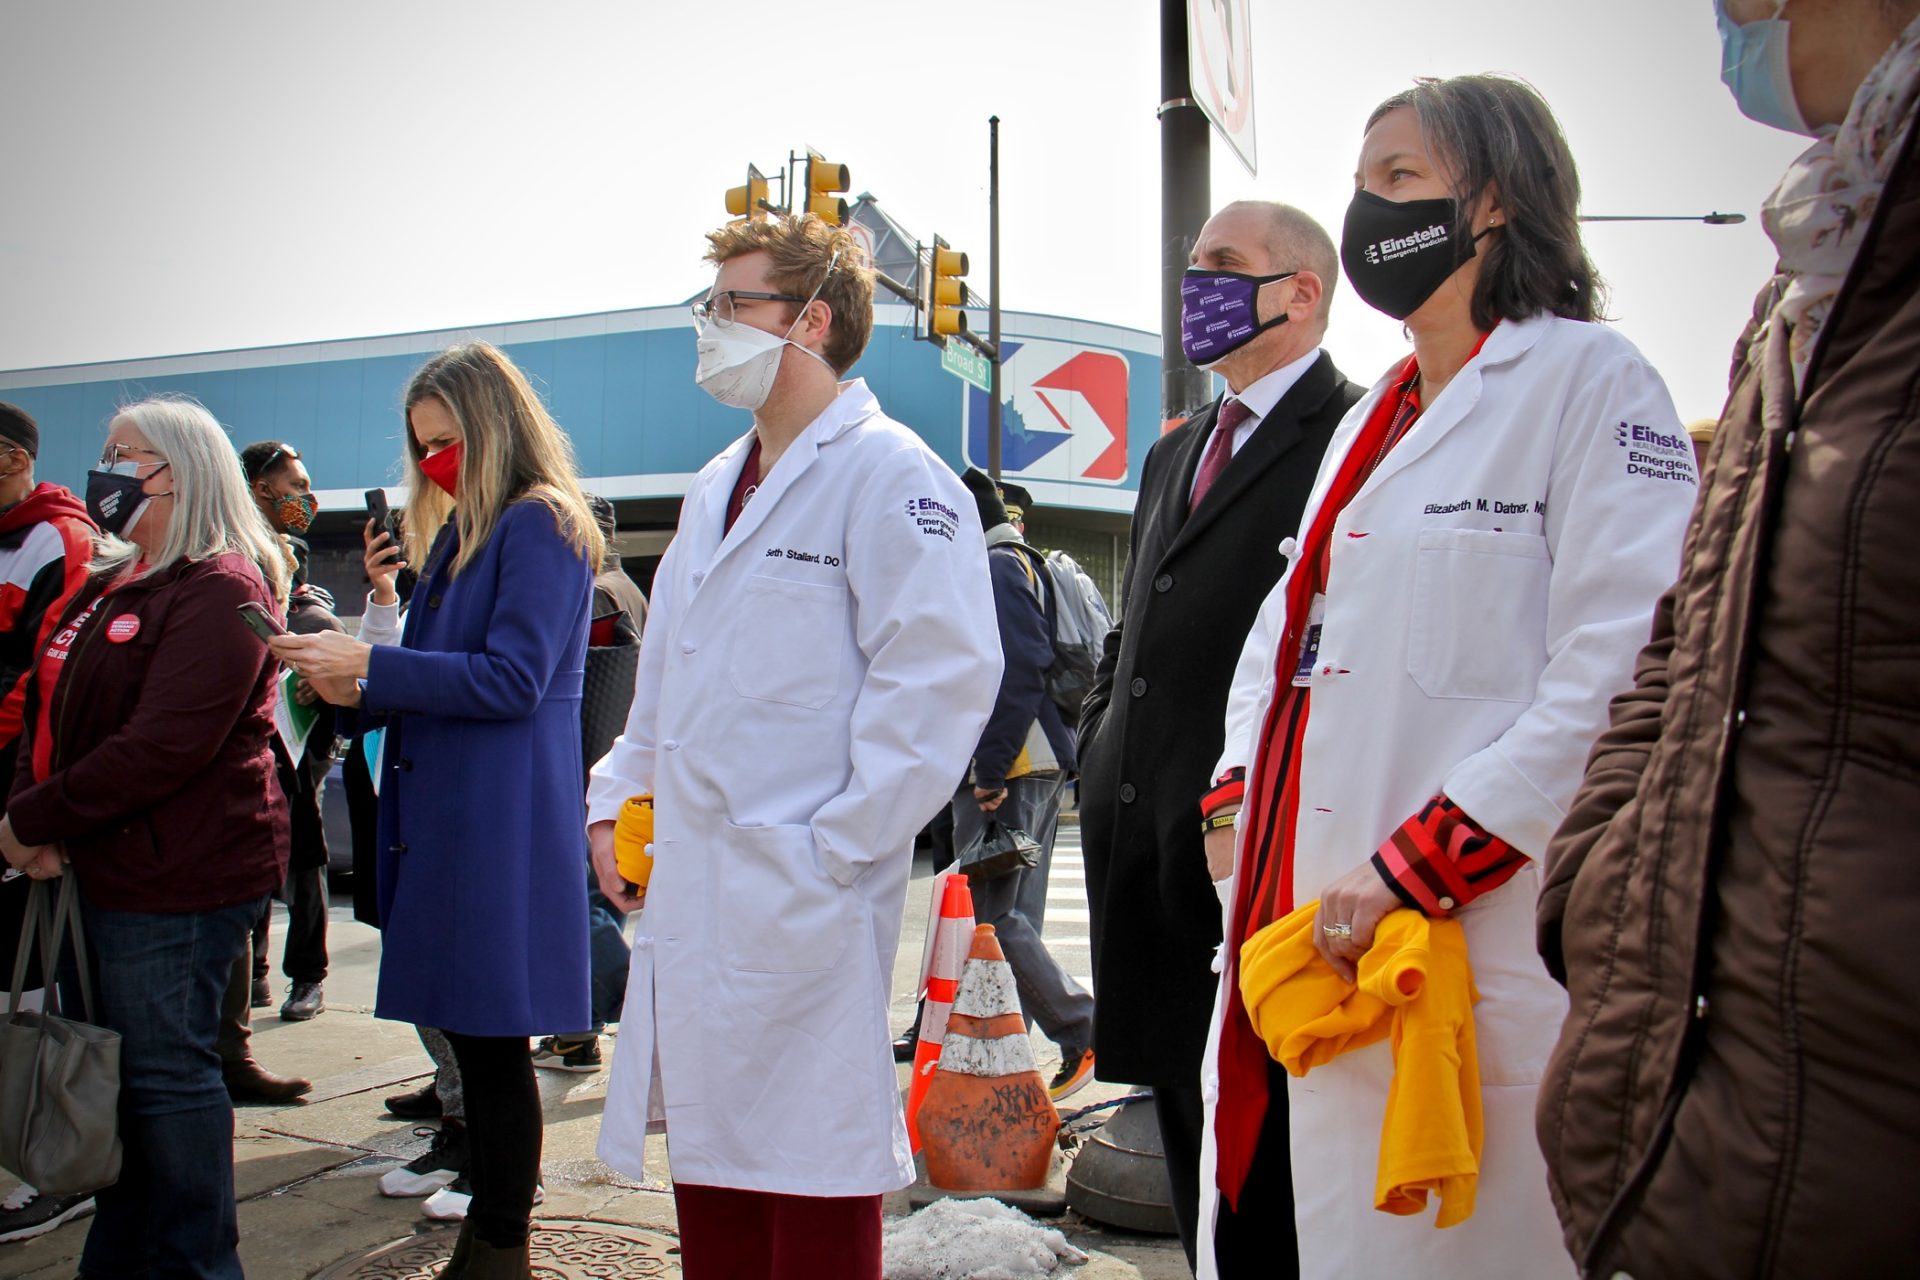 Einstein Medical Center doctors attend a press conference at the Olney Transportation Center, where a mass shooting occurred on Feb. 17, 2021. Seven of the eight victims were treated at nearby Einstein.